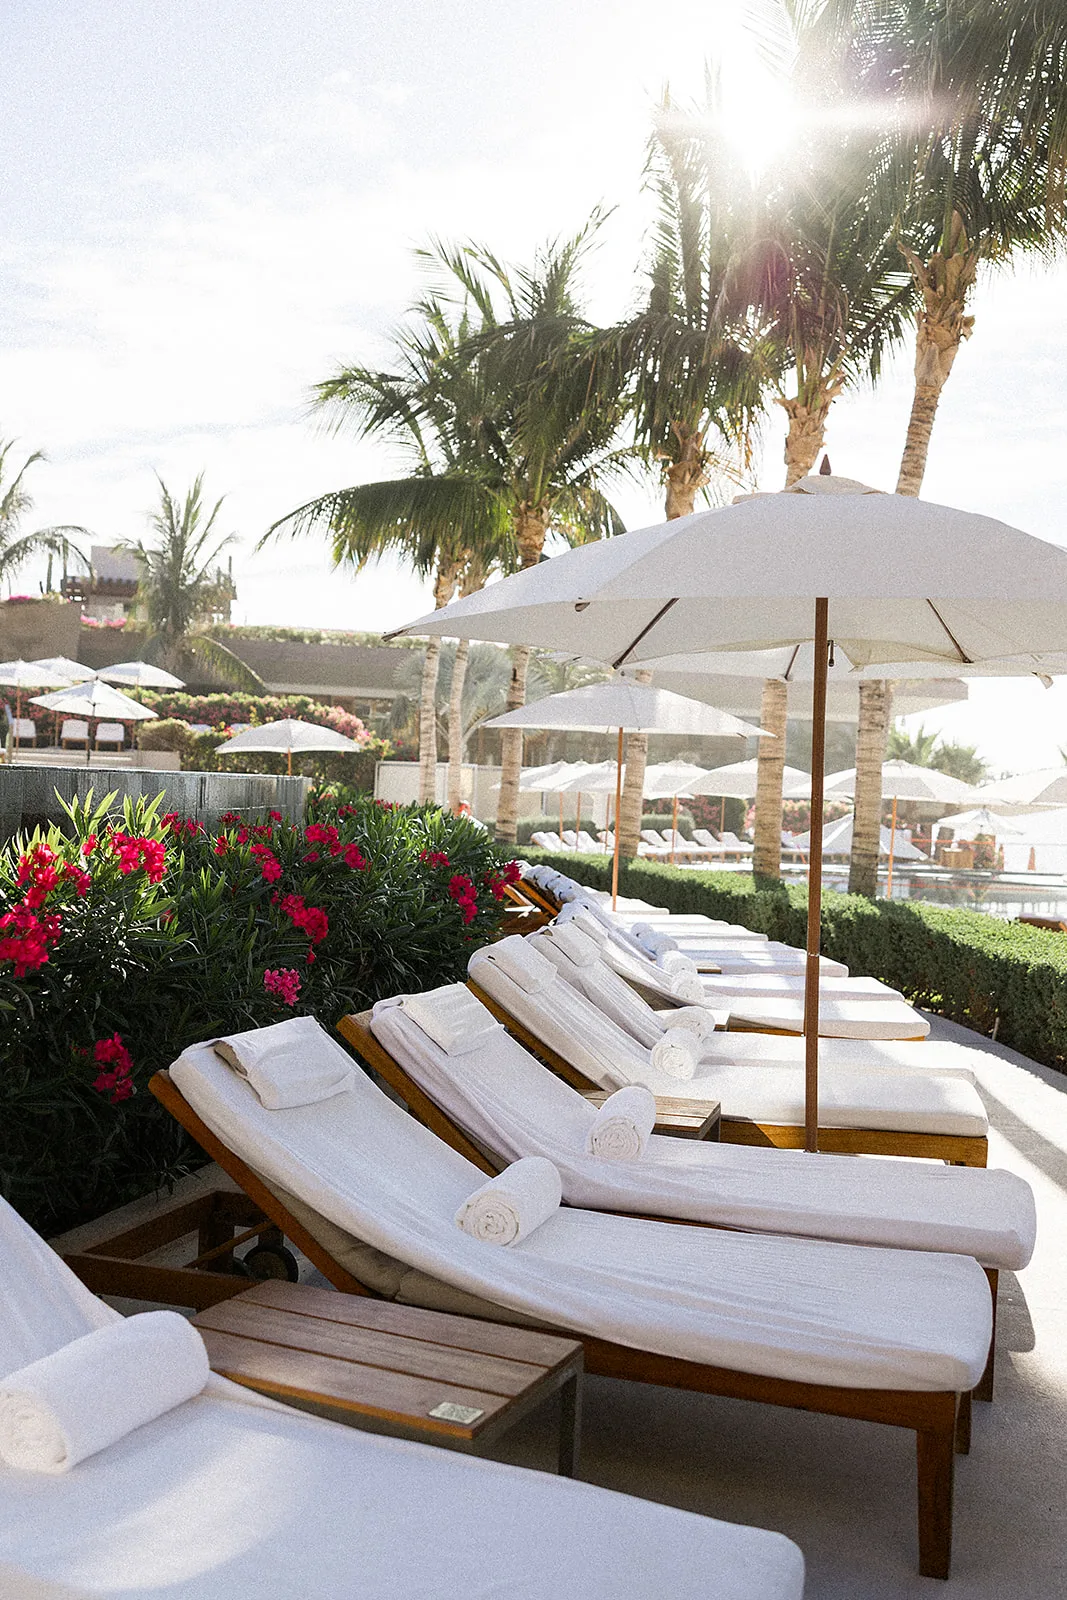 Wooden lounge beach chairs sit set up early in the morning under umbrellas by the pool